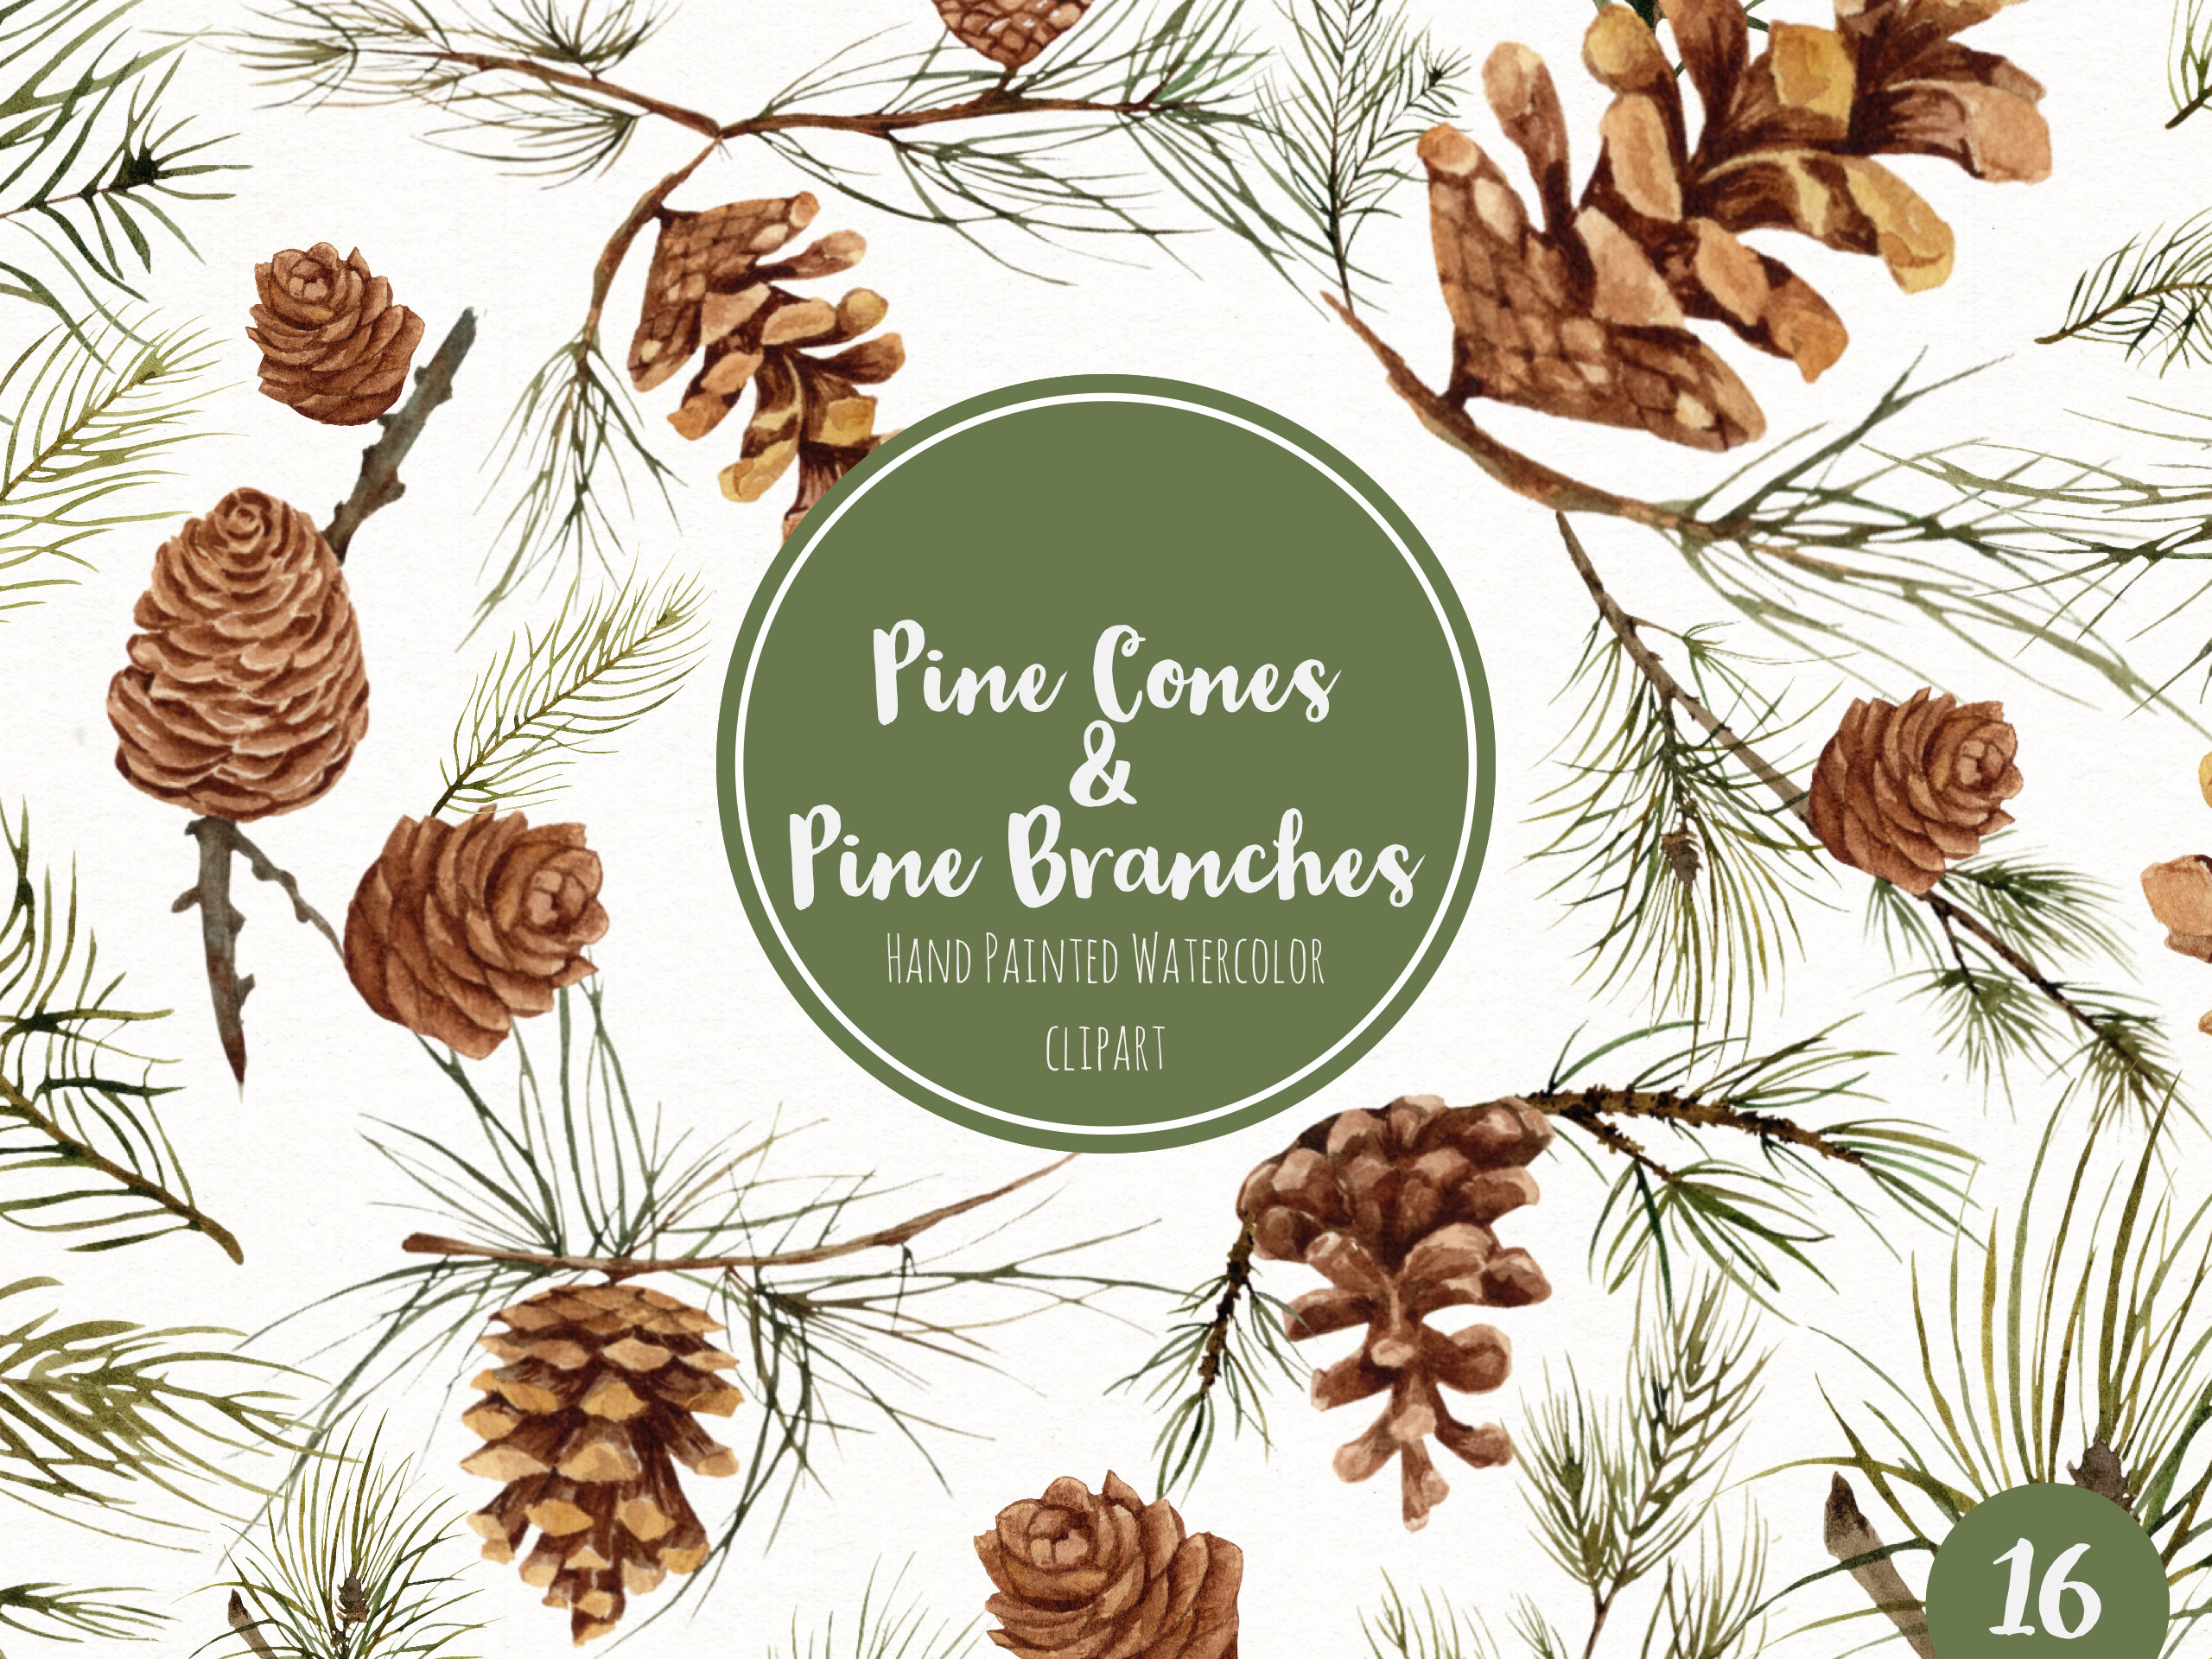 Winter Greenery Clip Art, Pine Clipart, Christmas Greens, Leaves, Berries,  Holly, Pine Cones, Pines, Watercolor Clipart DIY Christmas Cards 